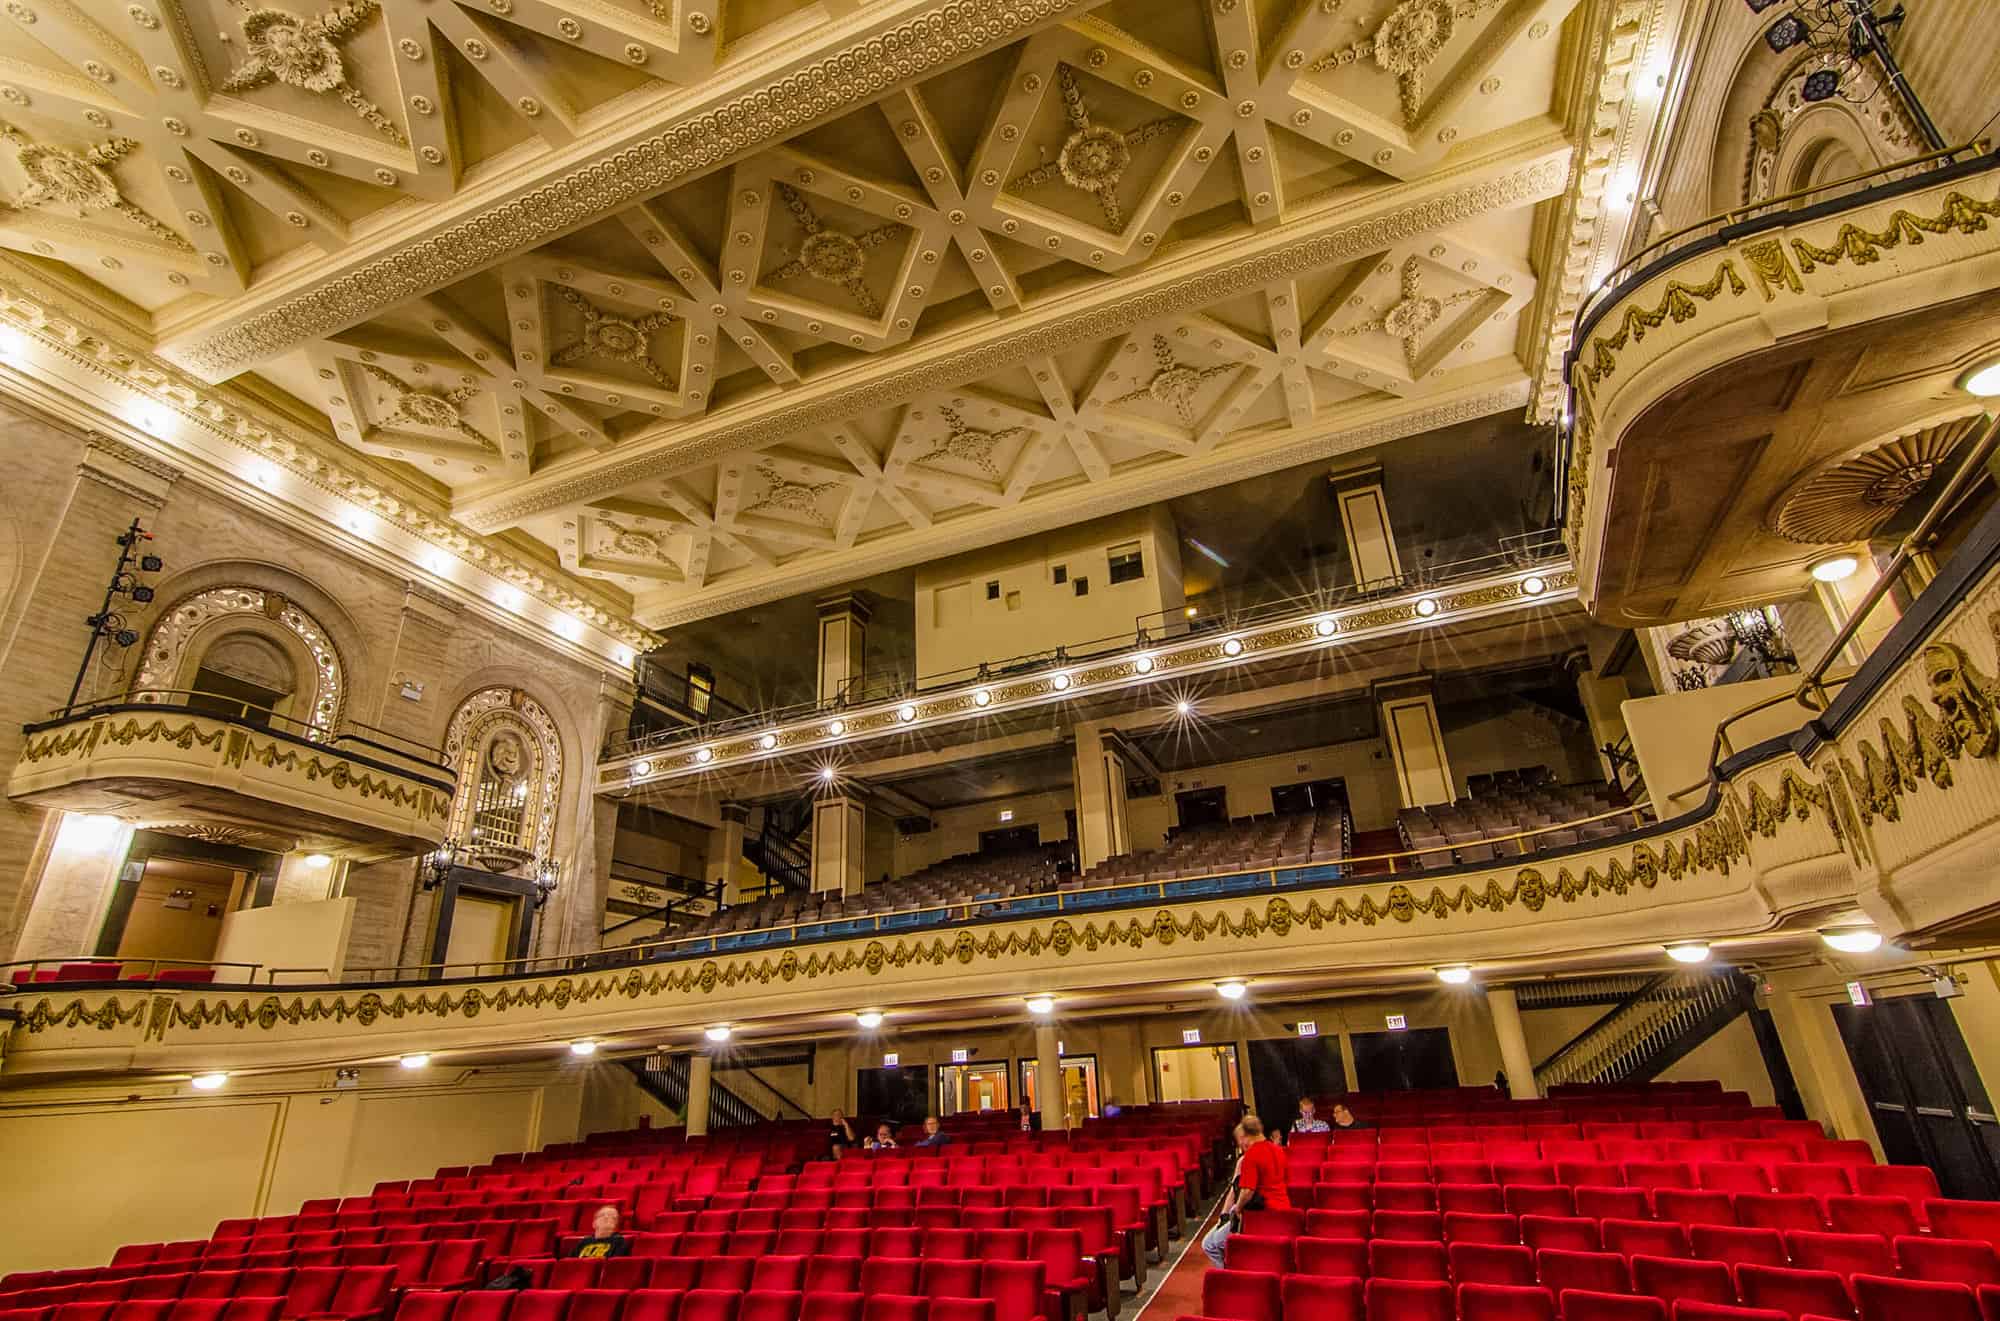 Image Description: The auditorium of the Studebaker Theater, looking up toward the historic ceiling.